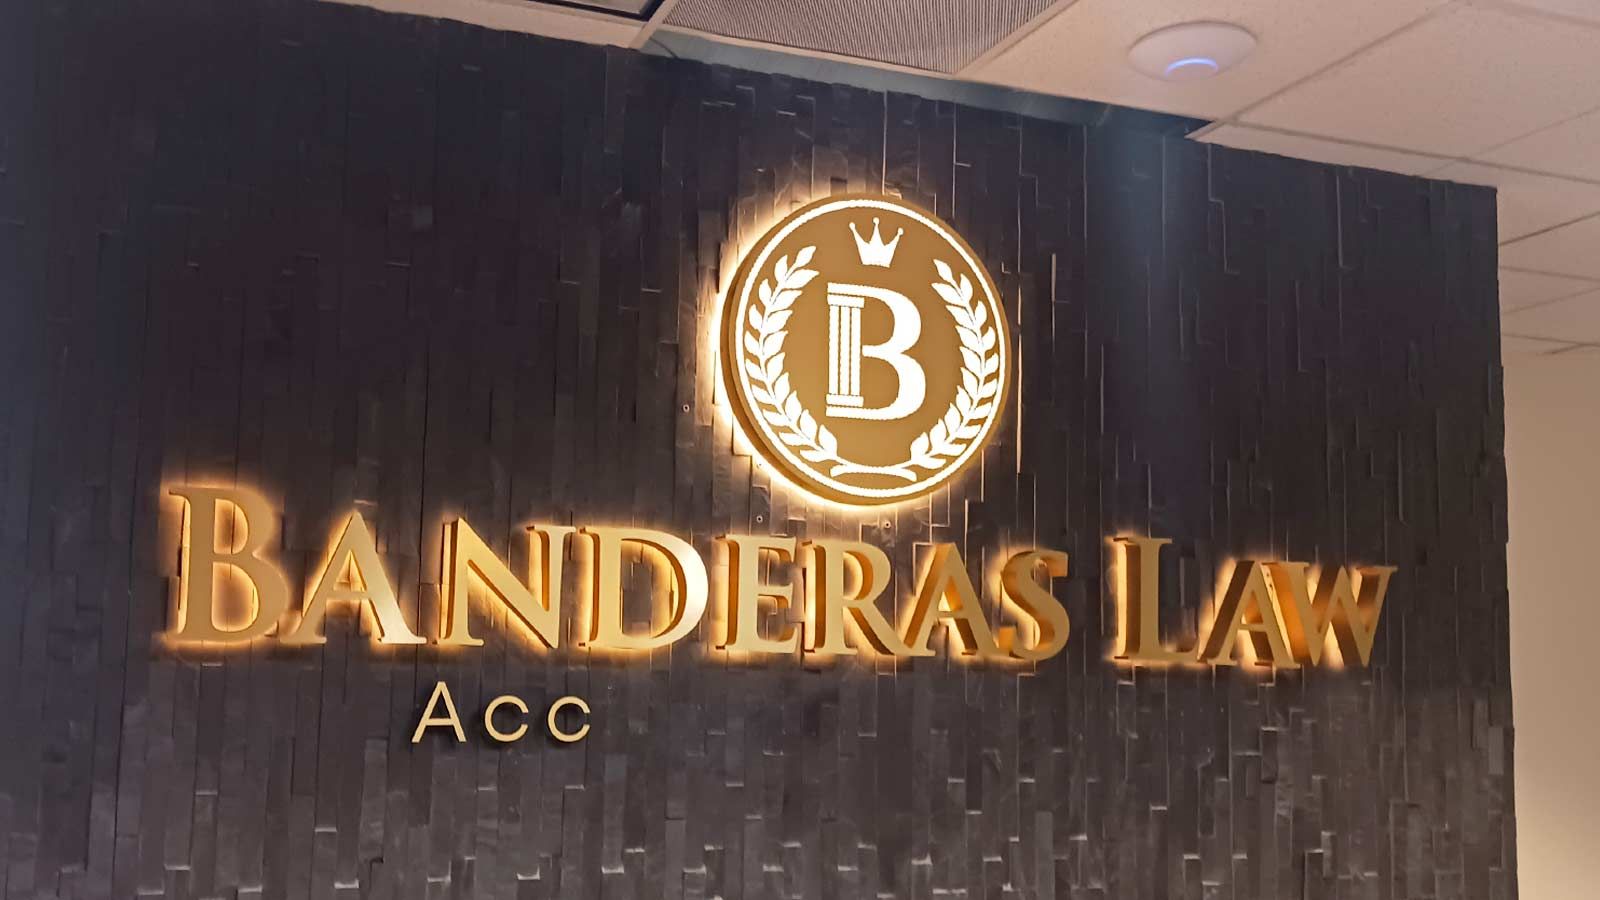 Banderas Law light up signs placed on the interior wall